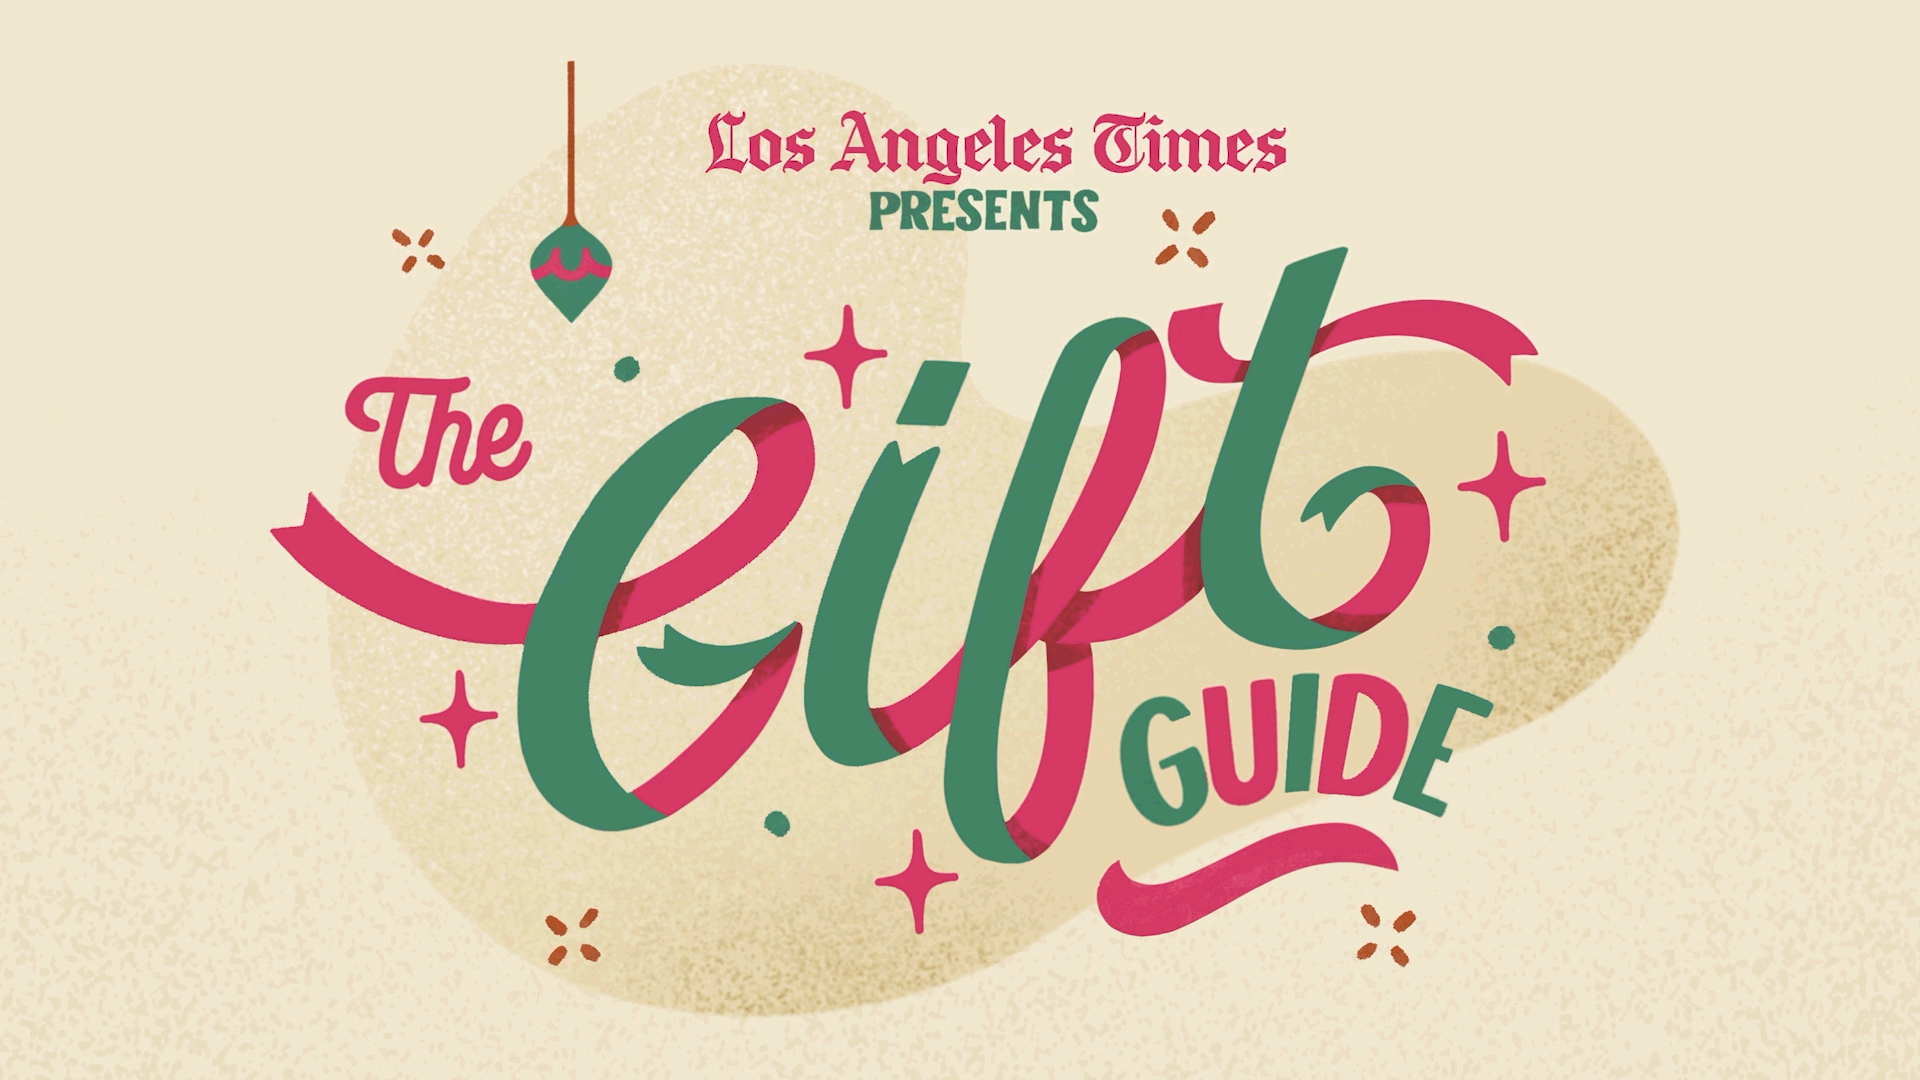 The Los Angeles Times presents: The Gift Guide